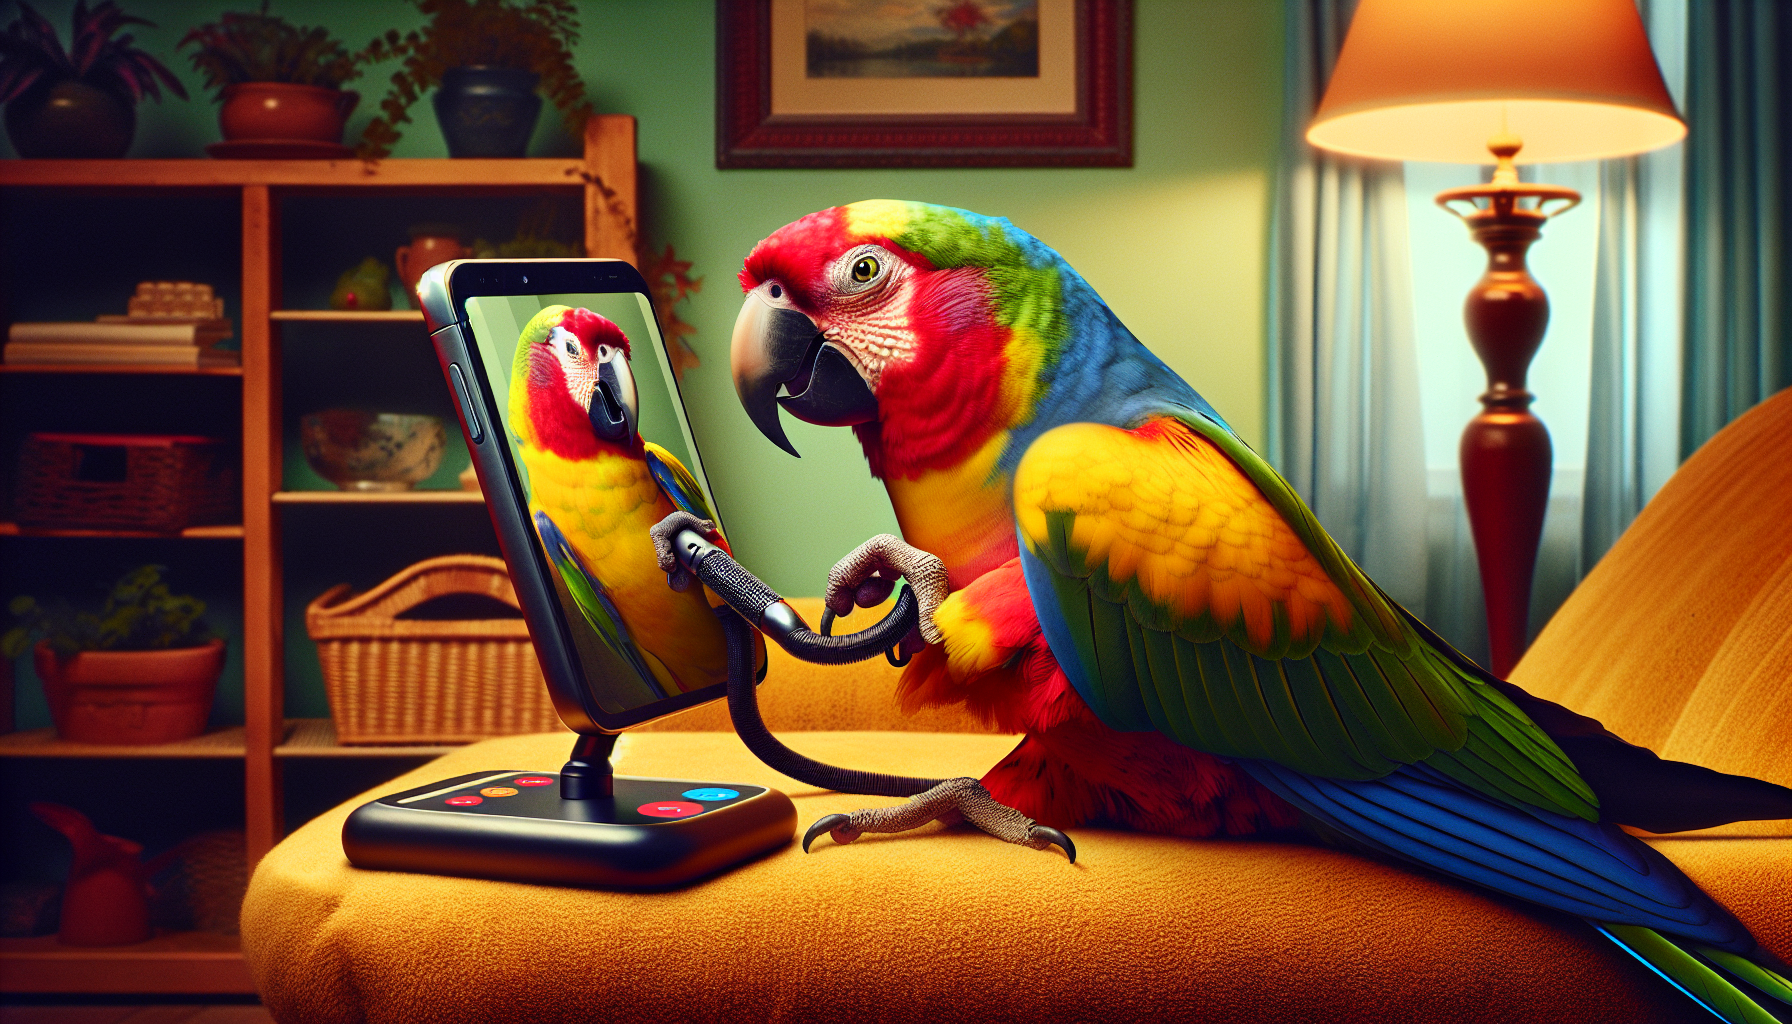 It seems that captive parrots take pleasure in video chatting with their friends via Messenger.